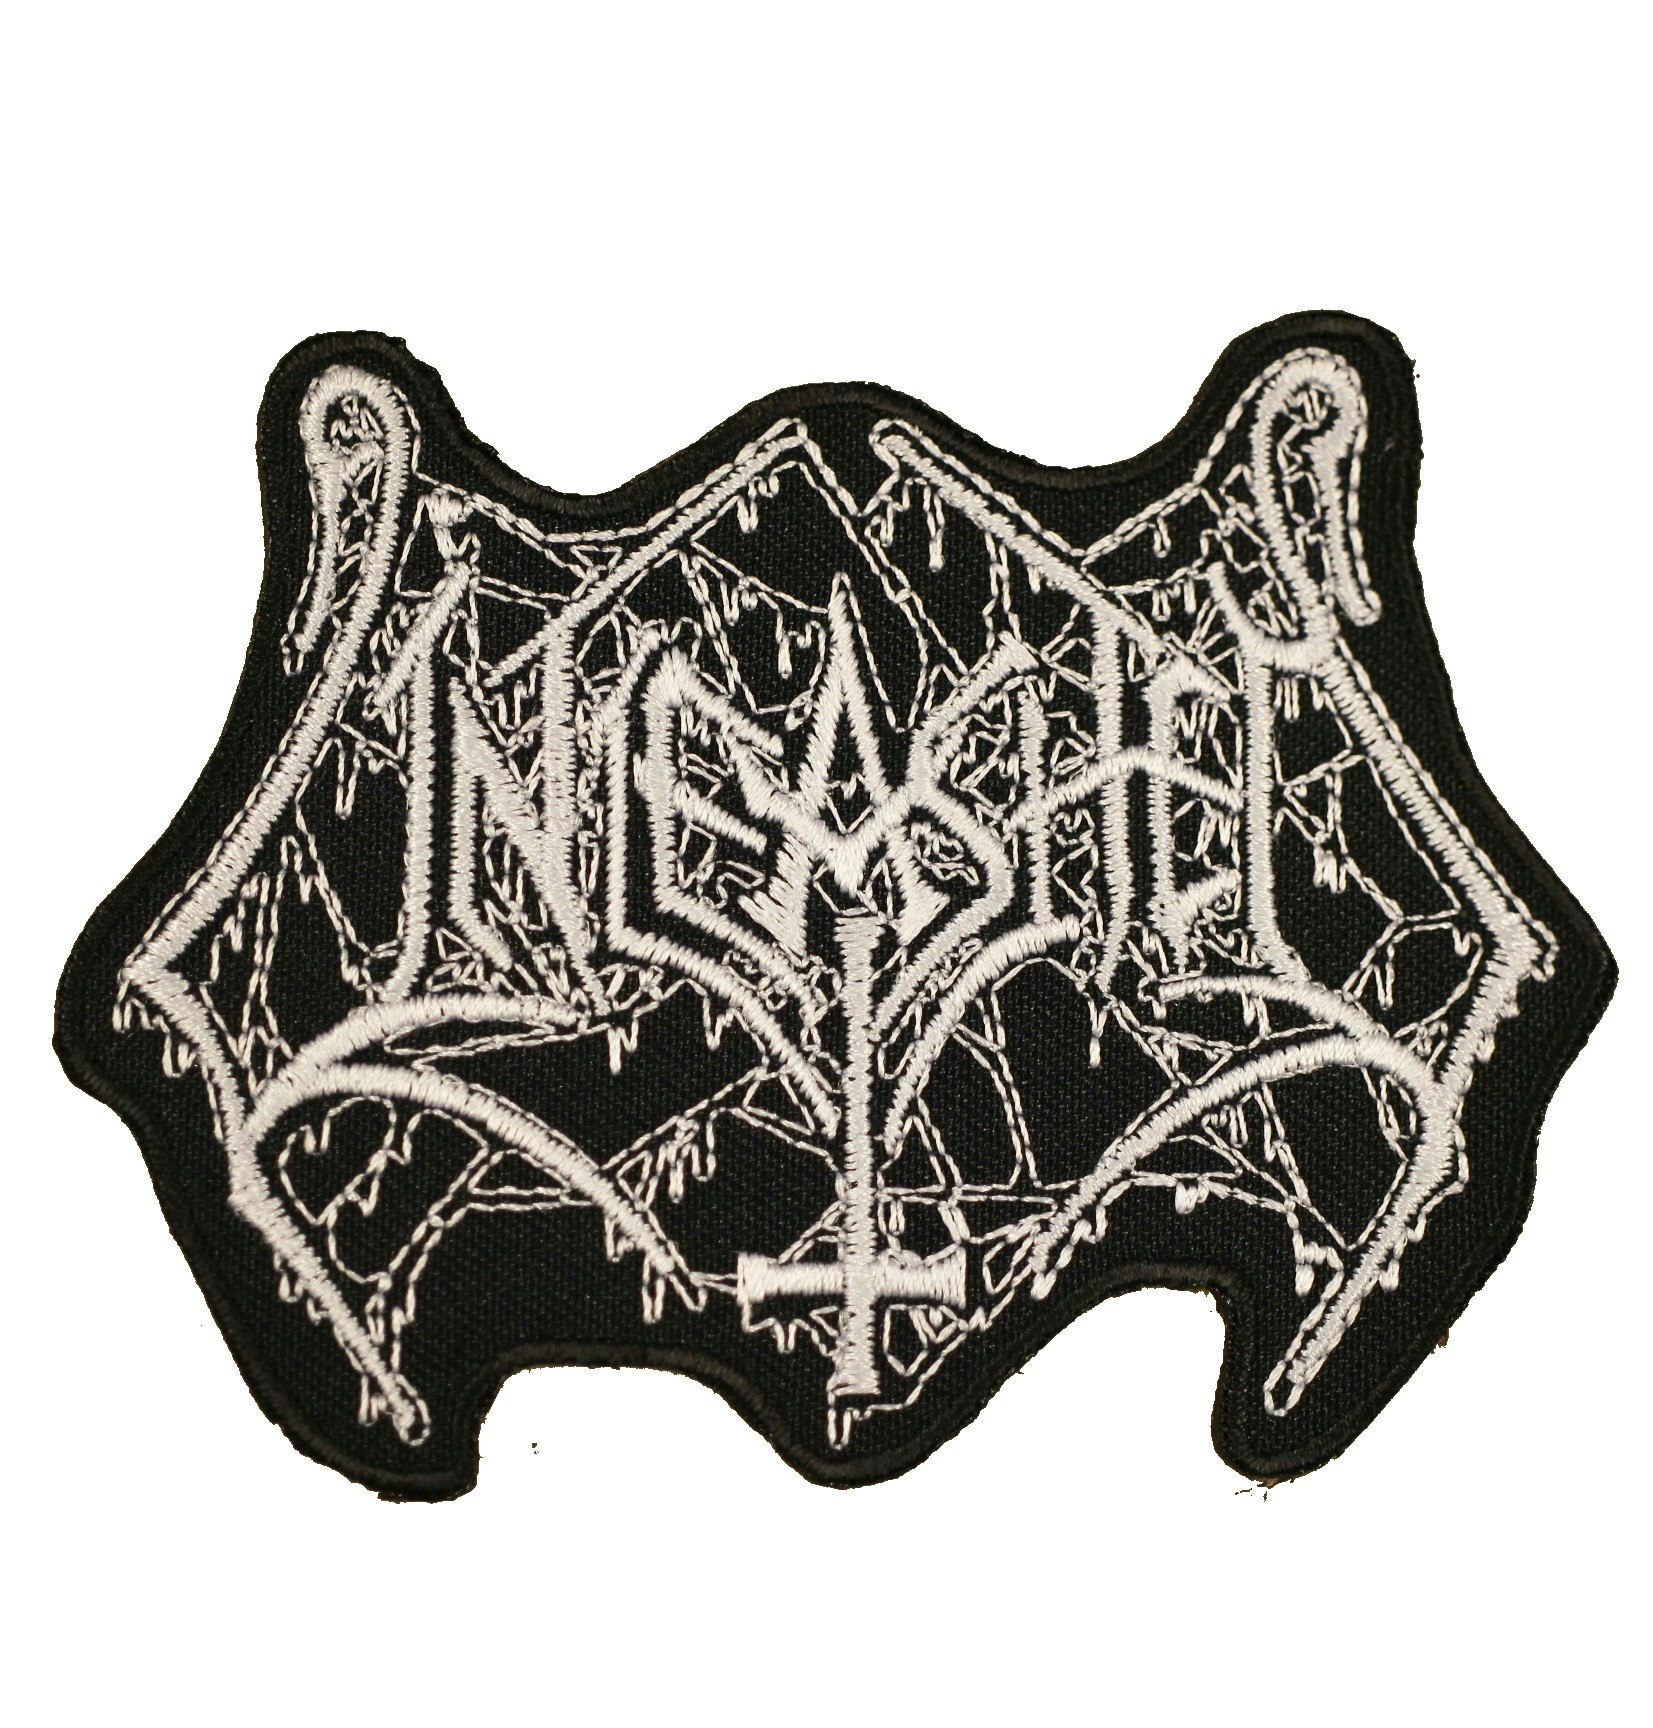 Unleashed logo patch